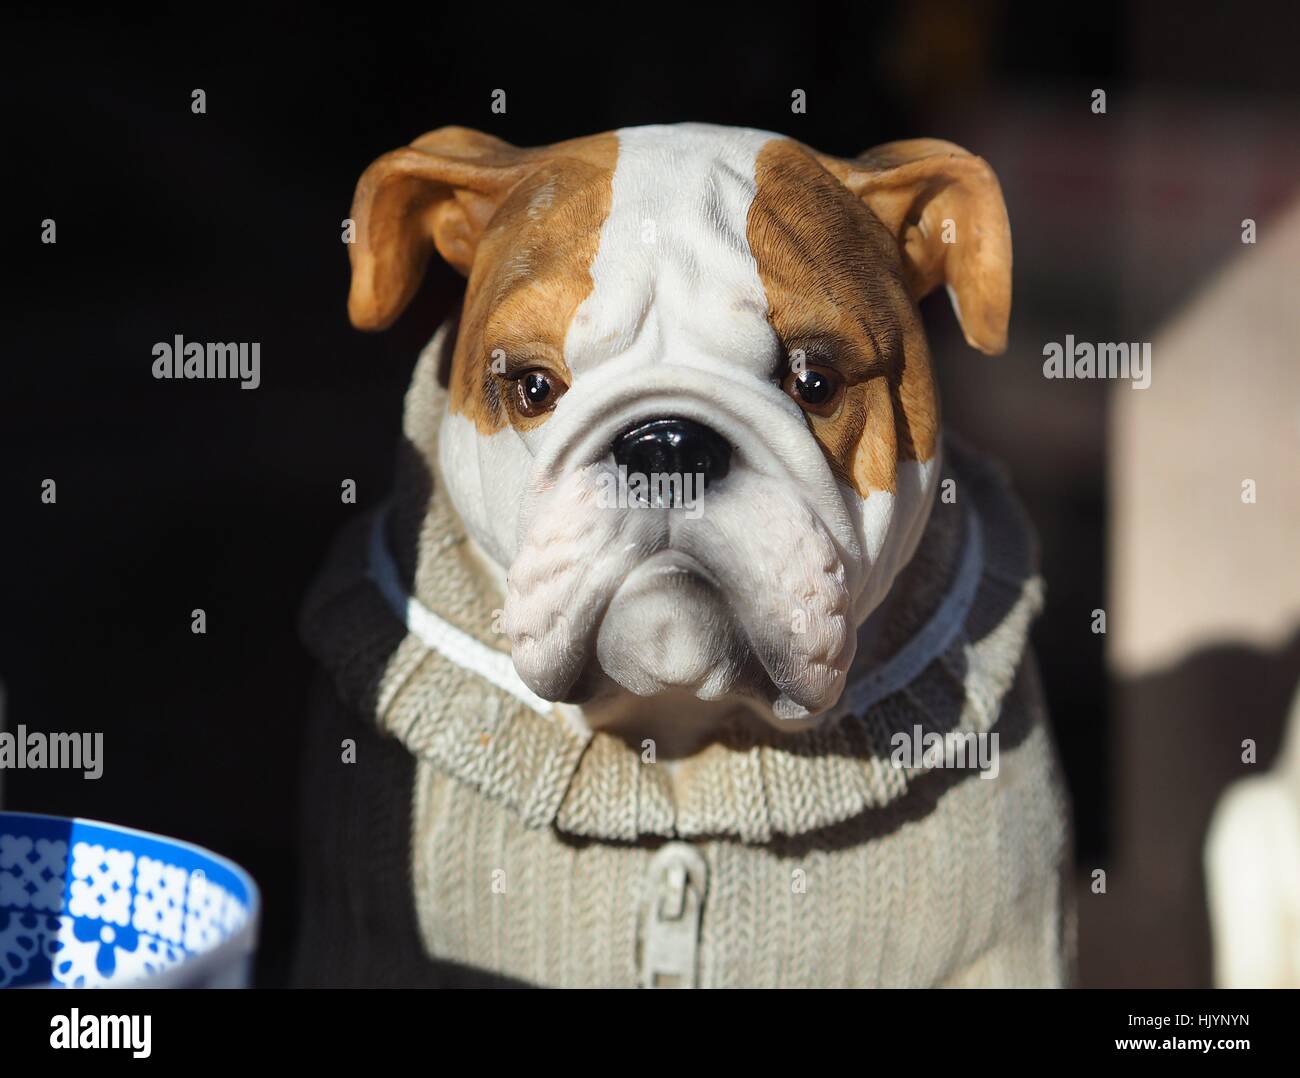 Photo series 'dogs in Berlin' -  A cheese figure of an English Bulldog is seen in the window of a furniture shop in Berlin on February 15, 2016. Berlin is often called the 'capital of dogs'. This picture is part of a long-term project on dogs in Berlin. Ph | usage worldwide Stock Photo